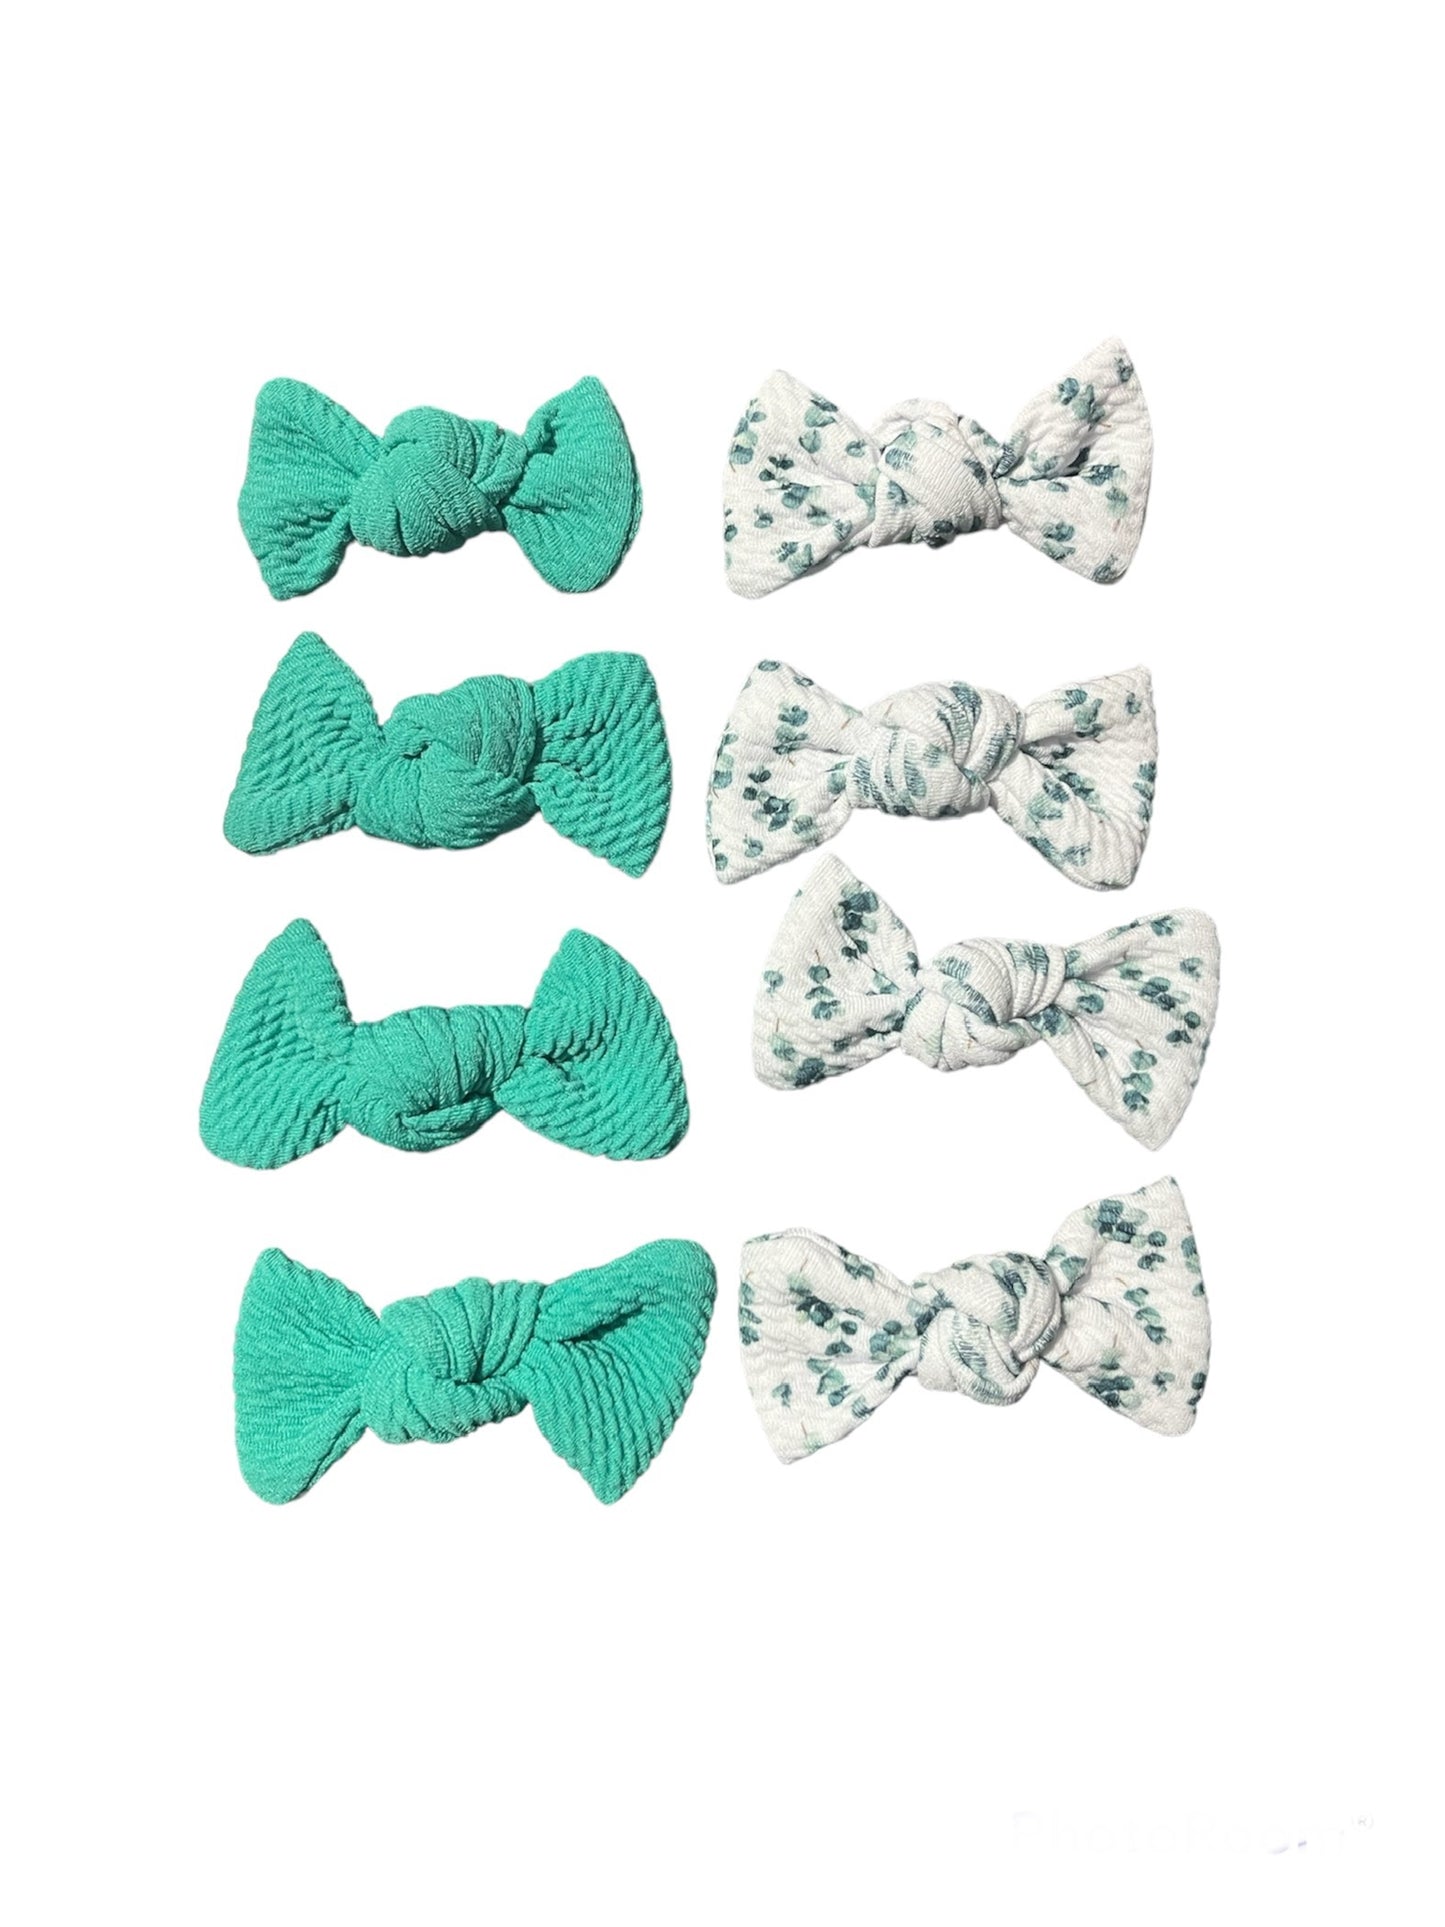 Green Eucalyptus Knotted Pigtail Bows!